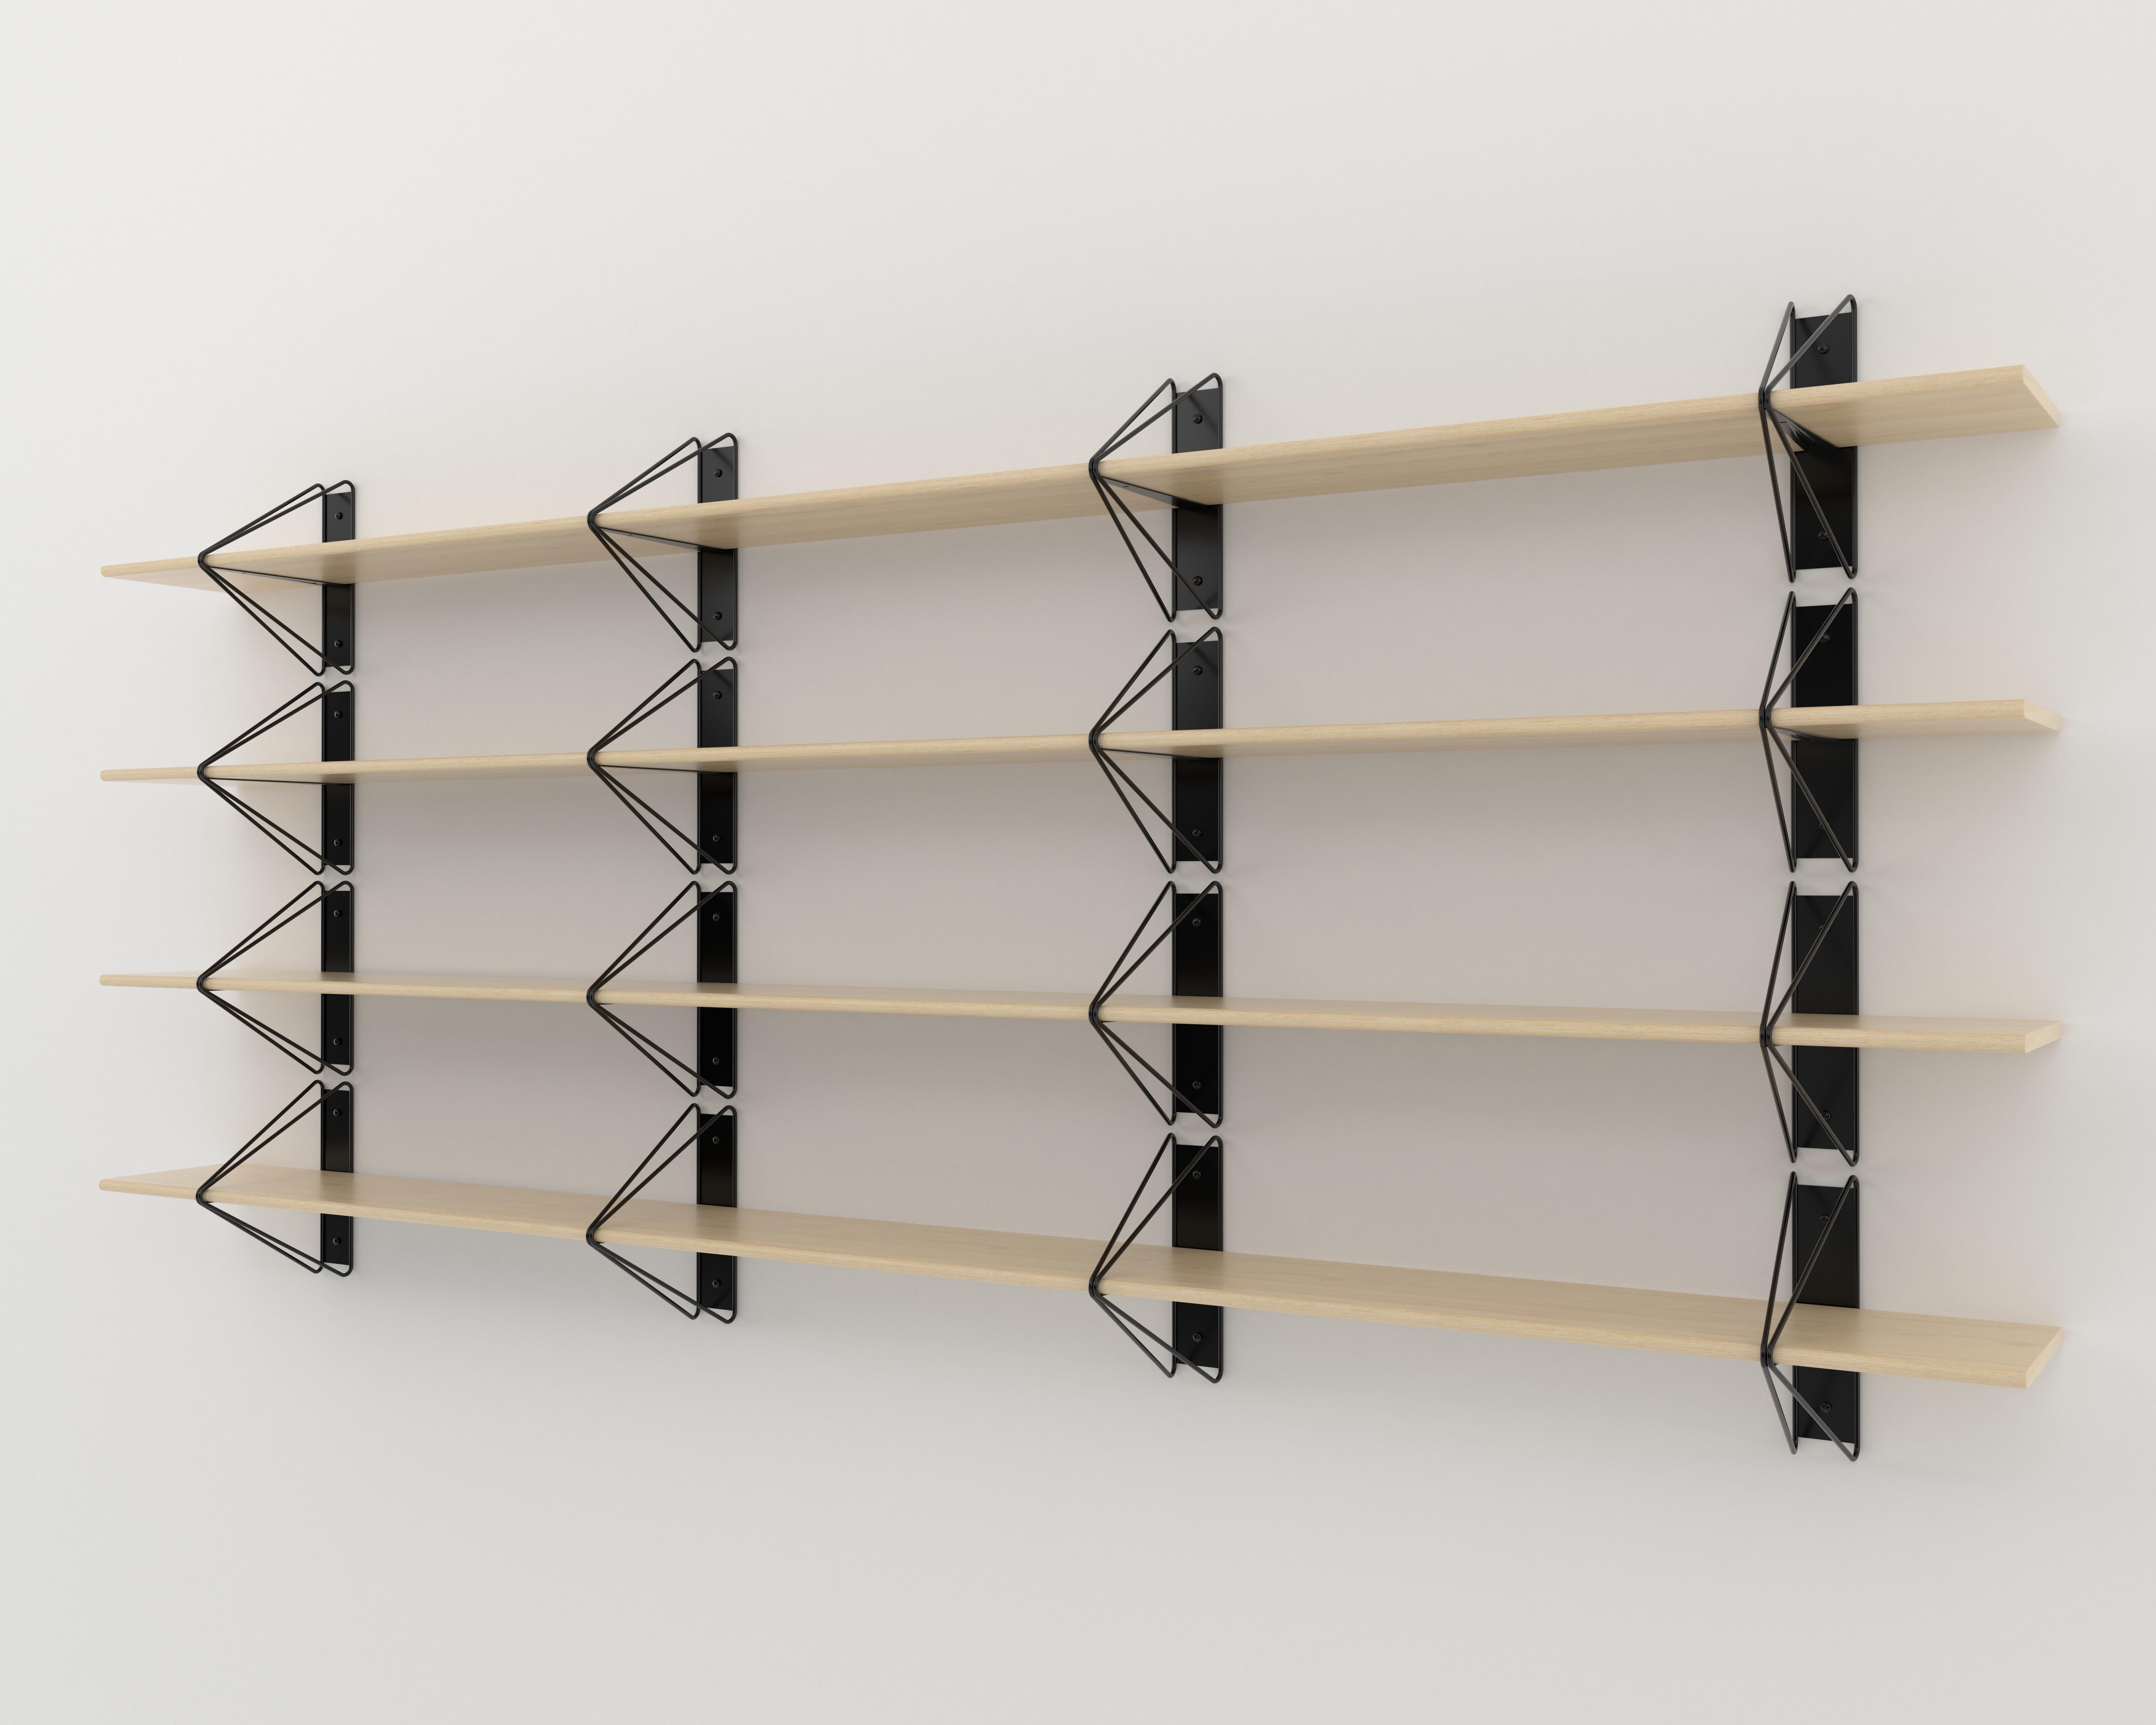 Metal Set of 5 Strut Shelves from Souda, Black and Maple, Made to Order For Sale